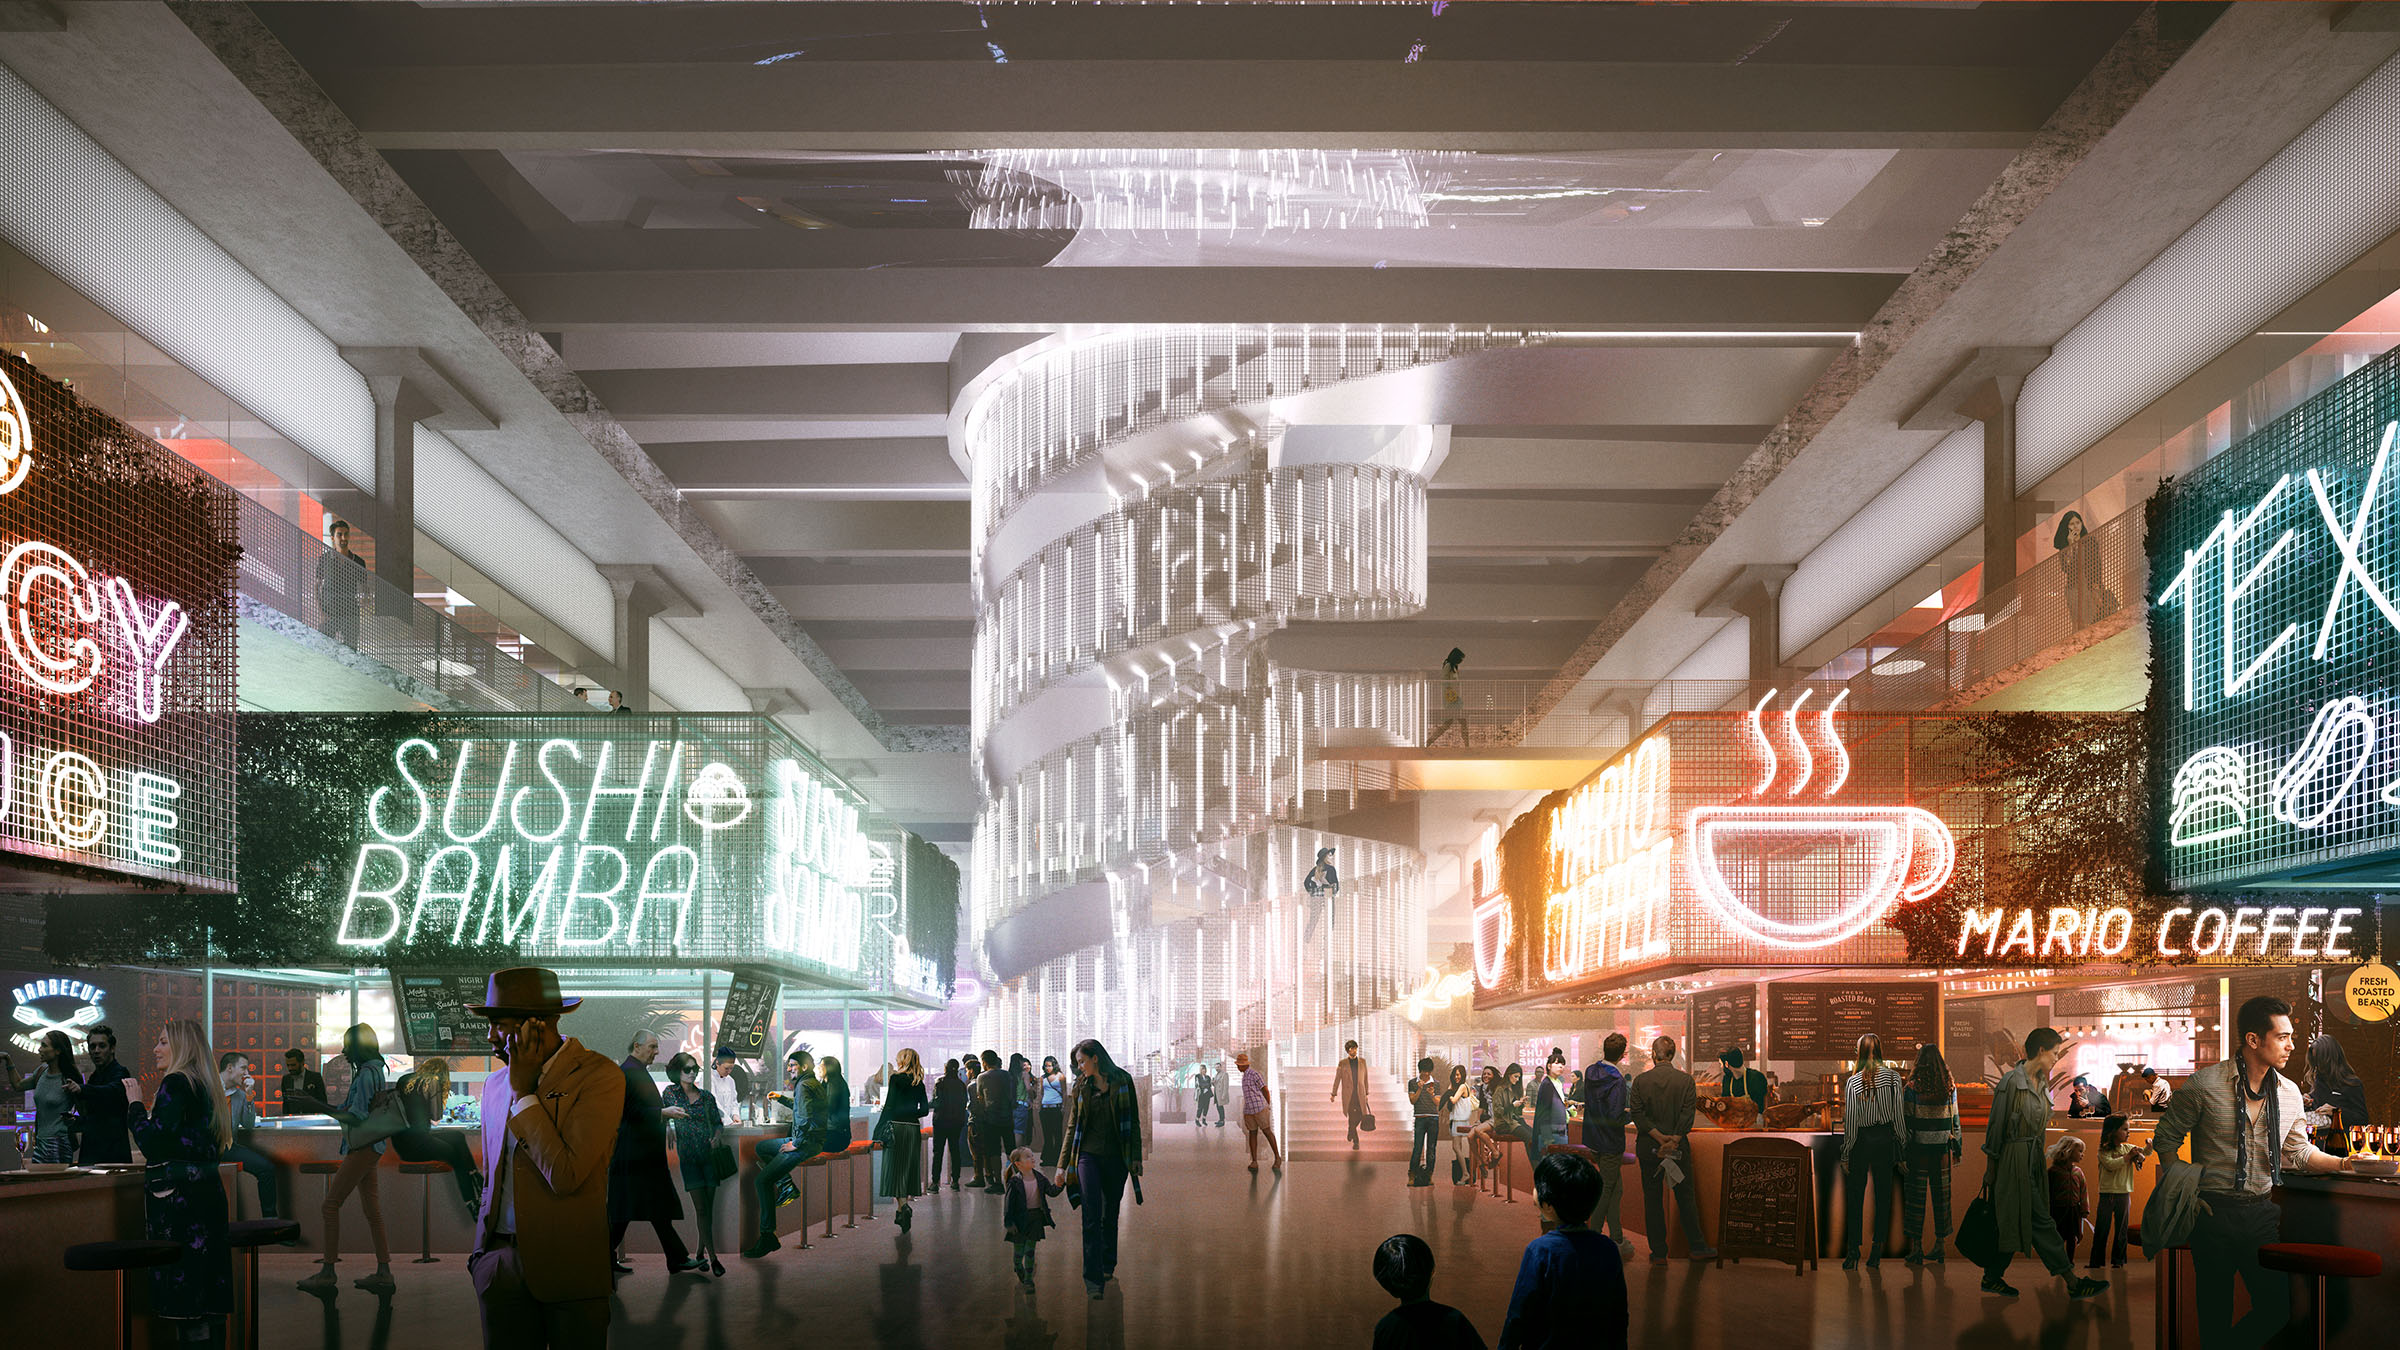 An artistic rendering of the market atrium of POST Houston at night, with neon signs inviting diners in.